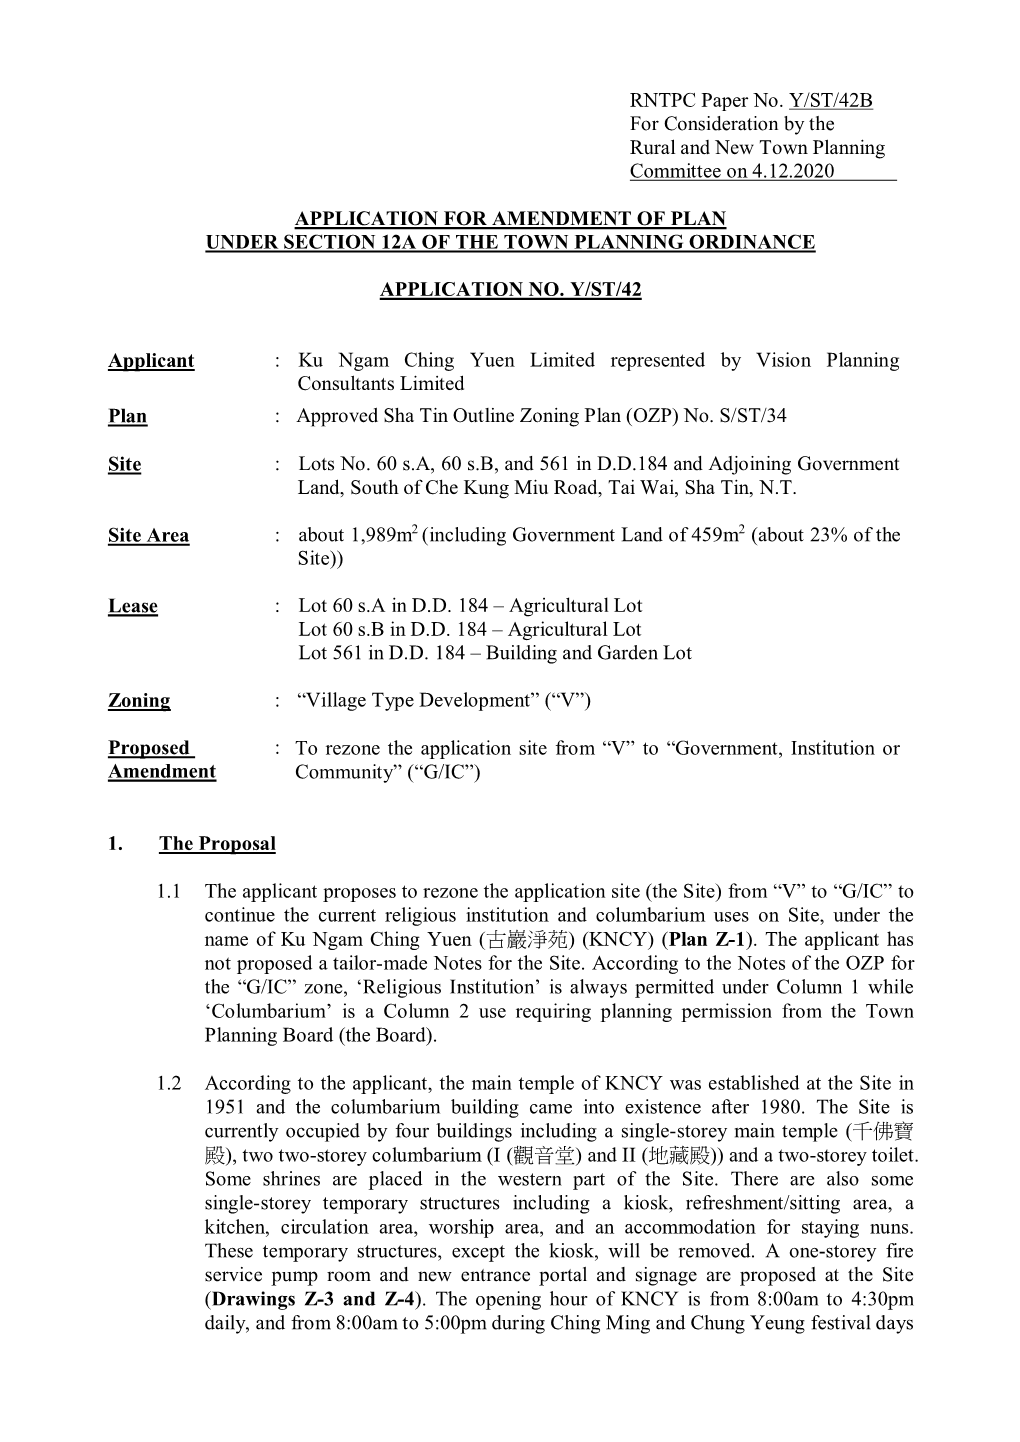 RNTPC Paper No. Y/ST/42B for Consideration by the Rural and New Town Planning Committee on 4.12.2020